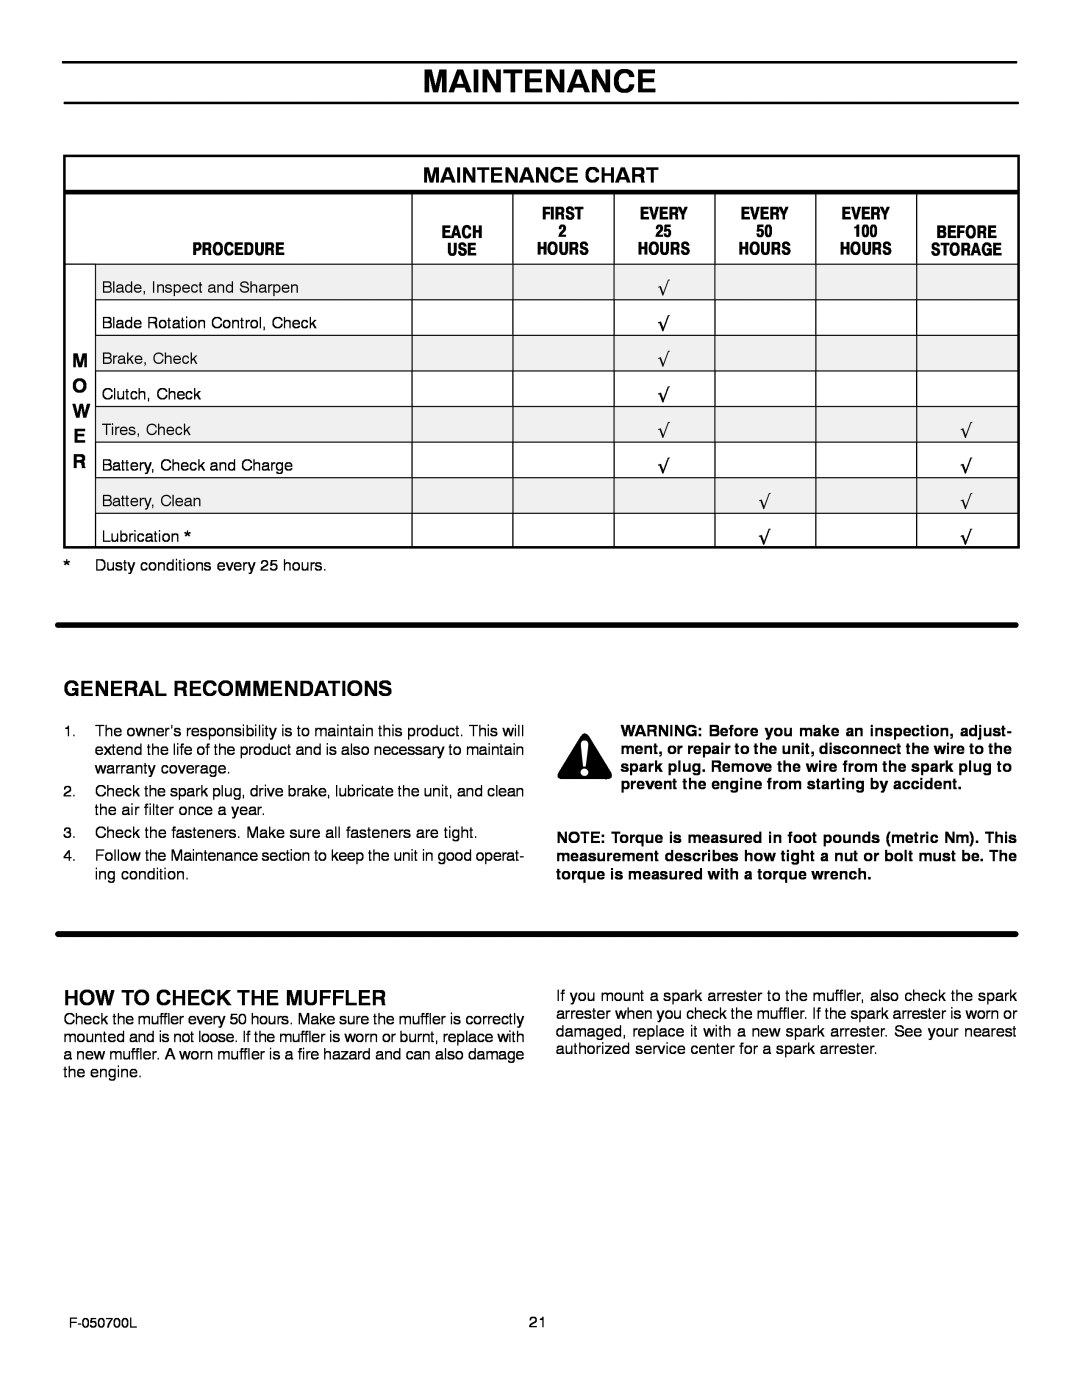 Murray 405000x8E manual Maintenance Chart, General Recommendations, How To Check The Muffler 